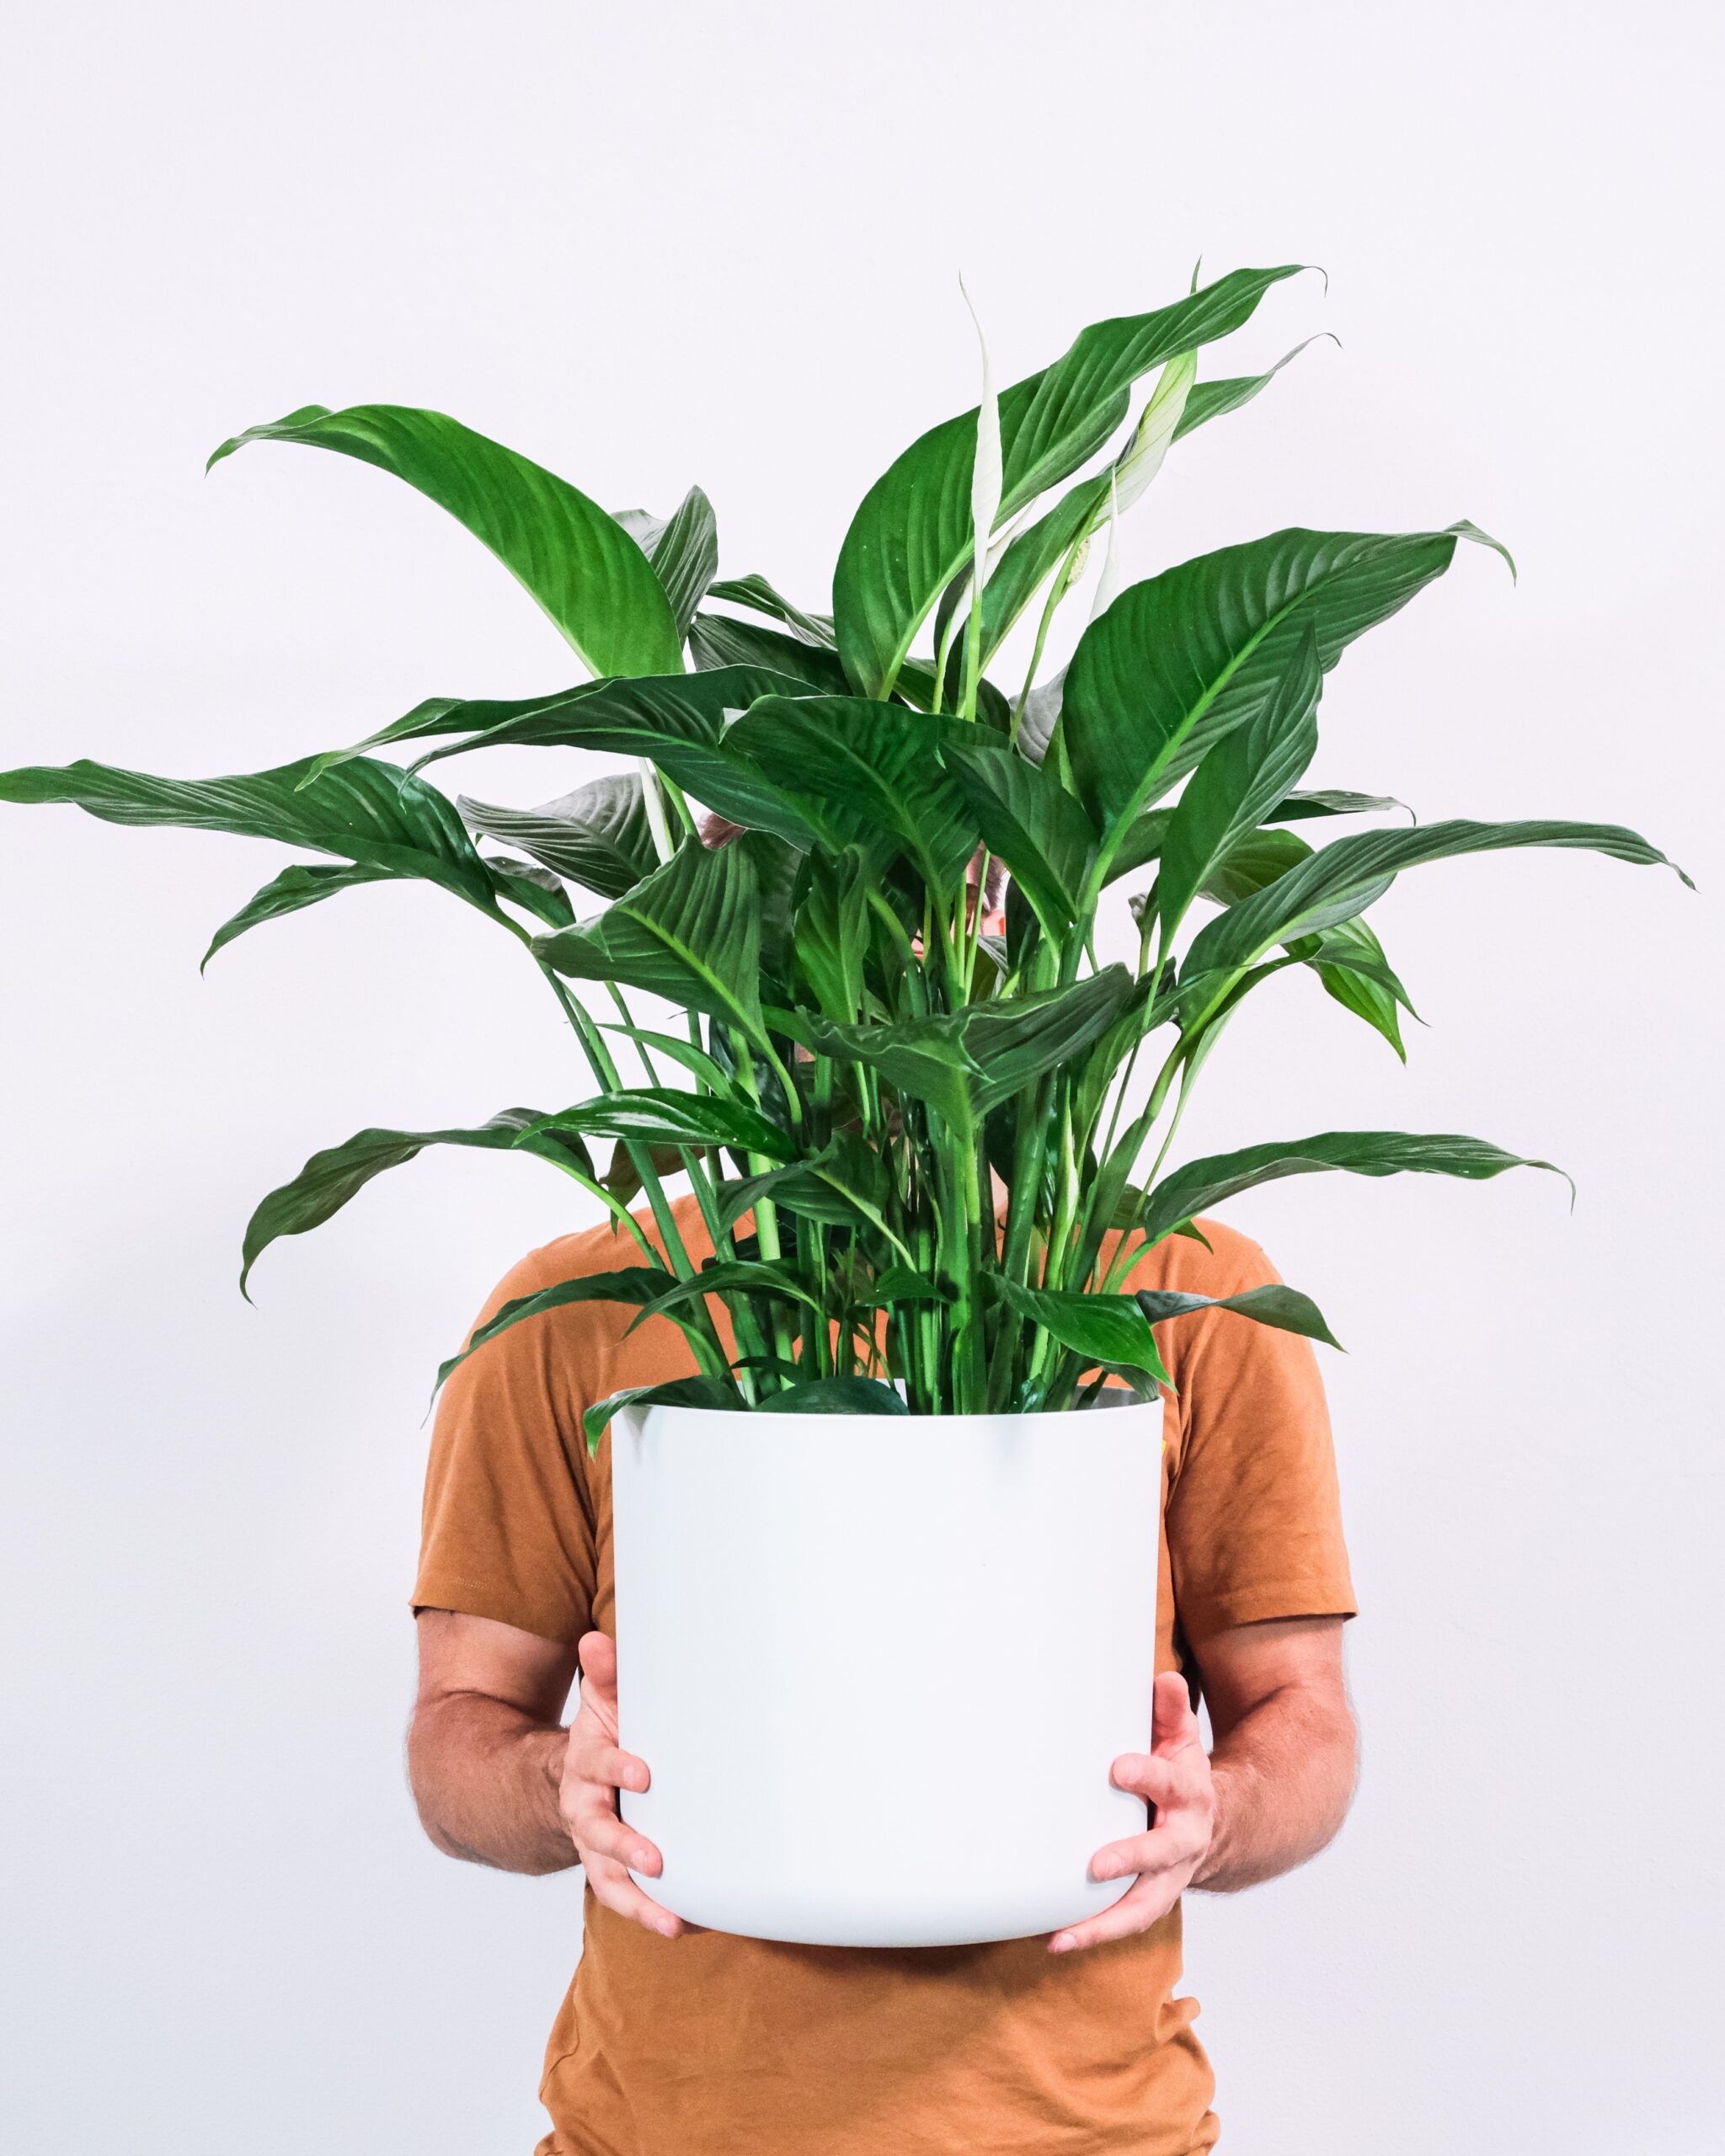 A person holding a Spathiphyllum in a white pot.